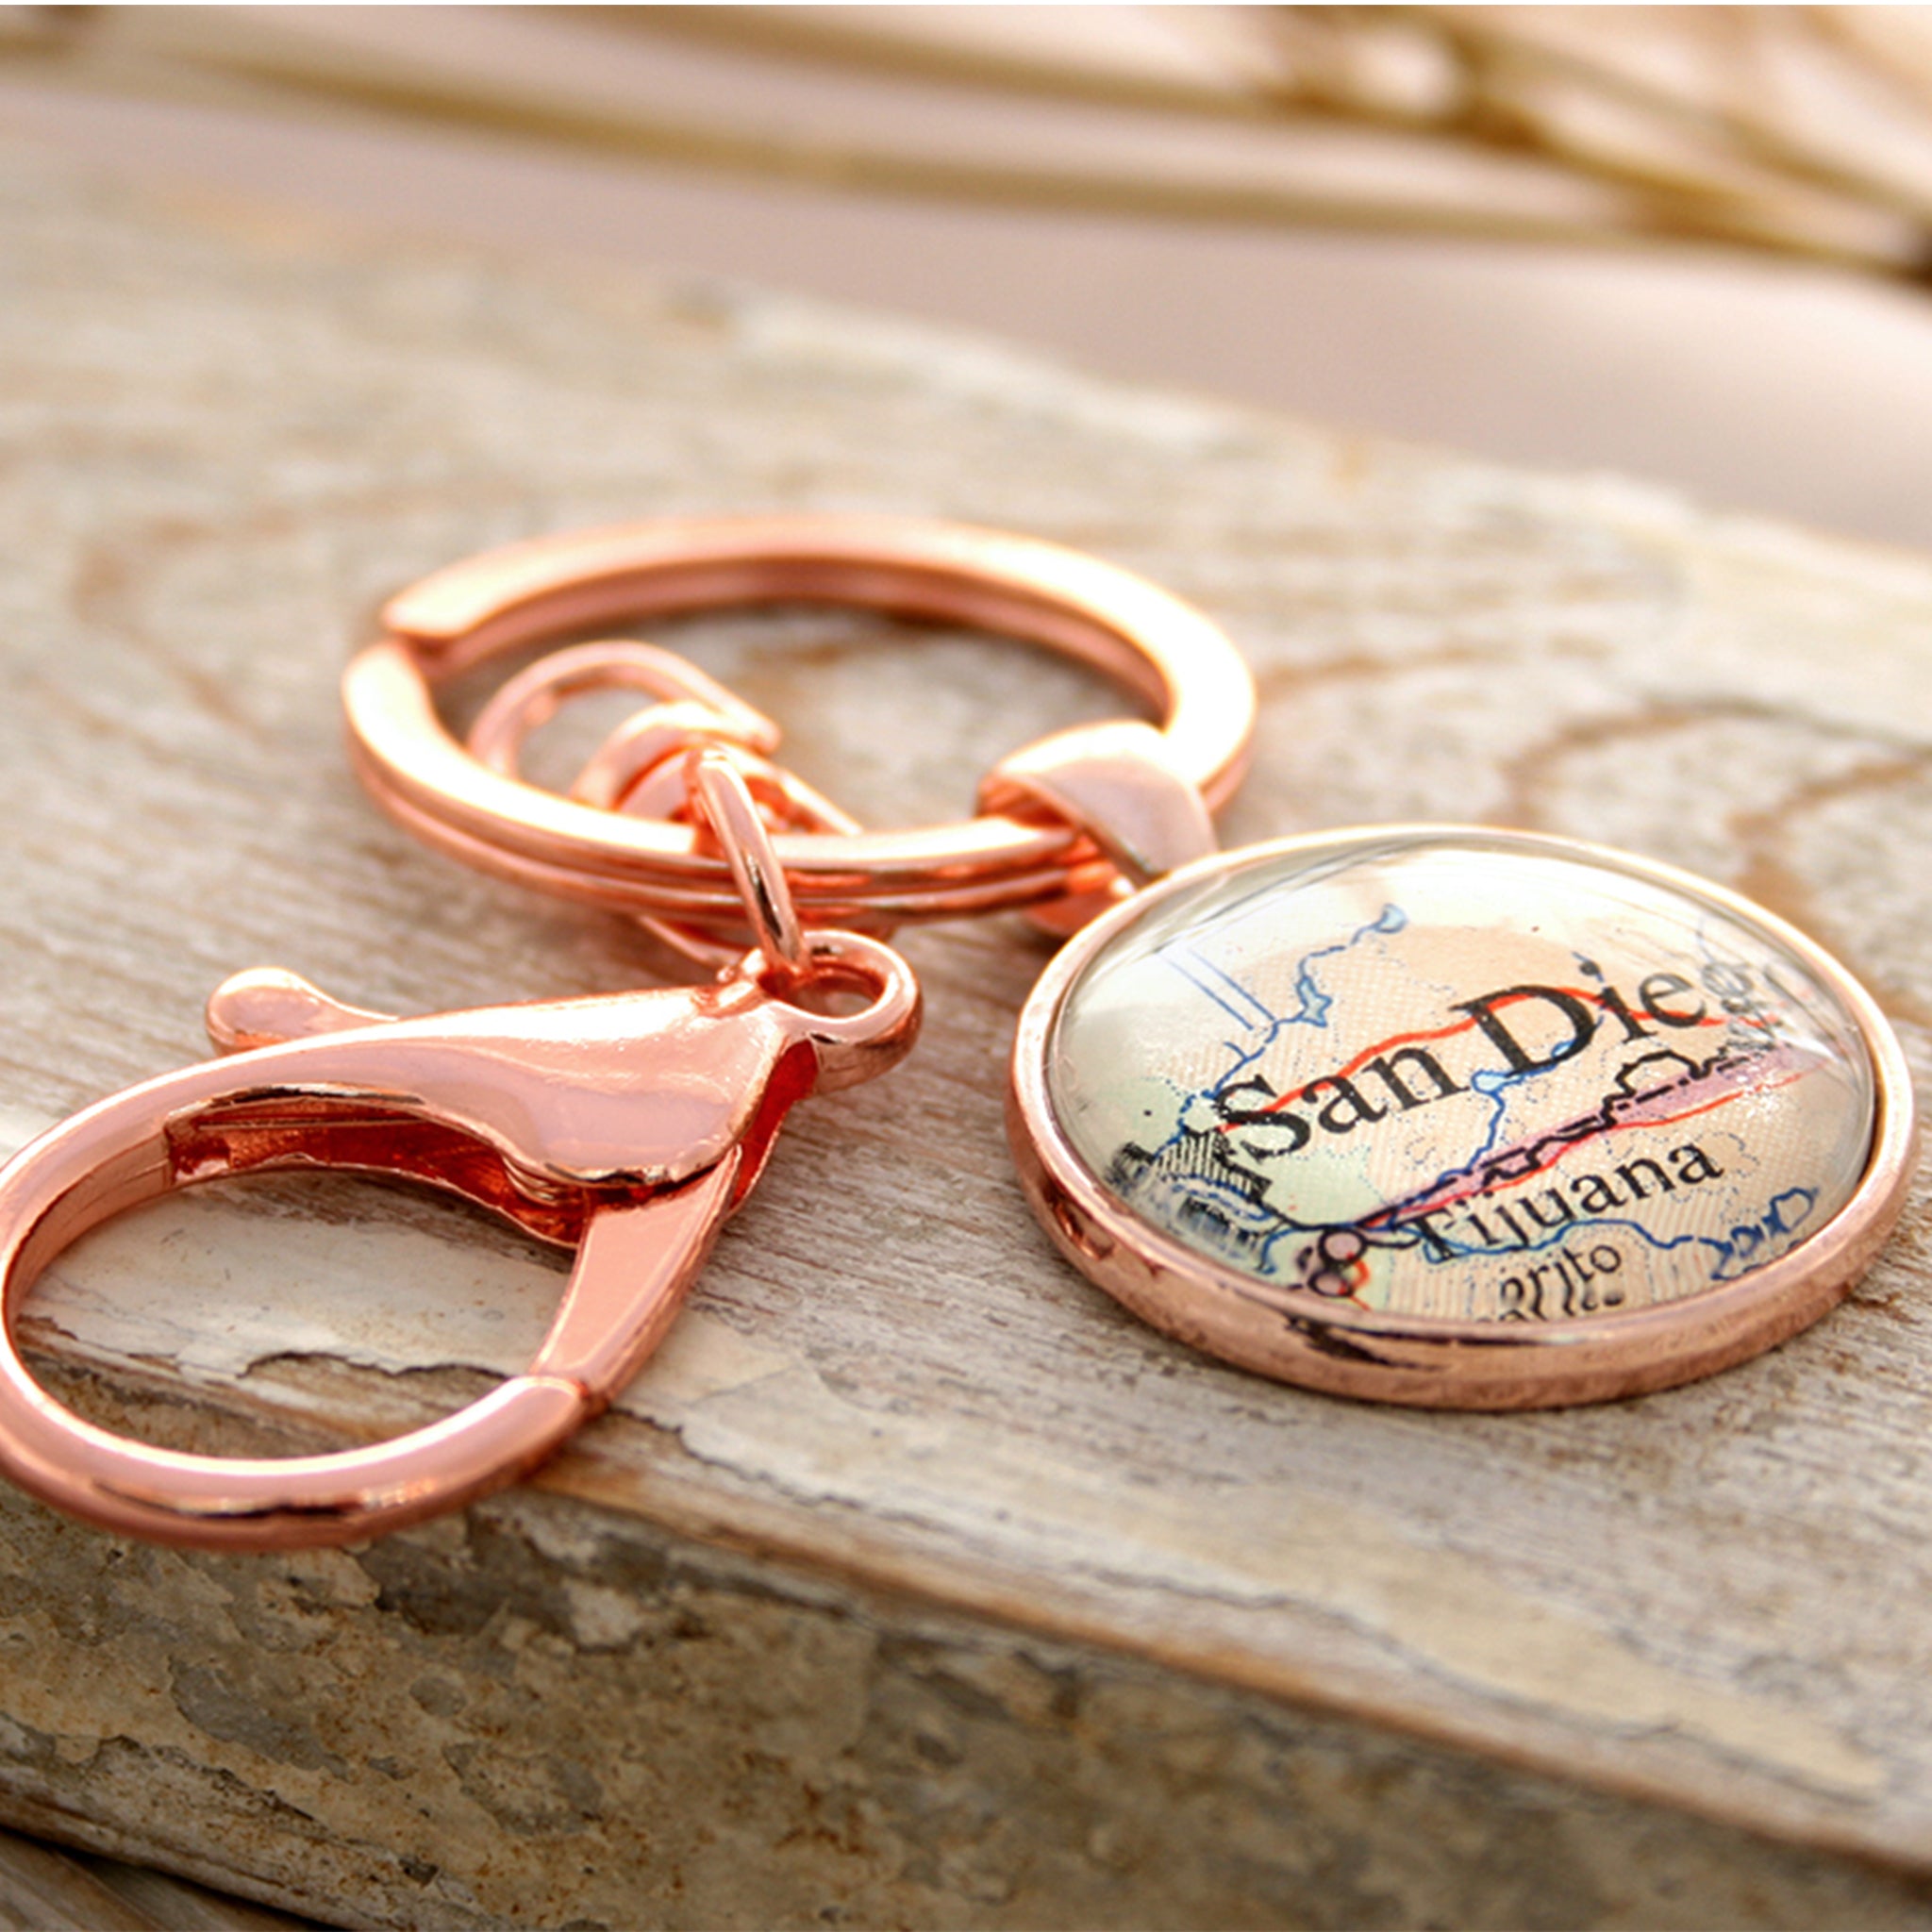 Personalised keyring in rose gold color featuring map of San Diego